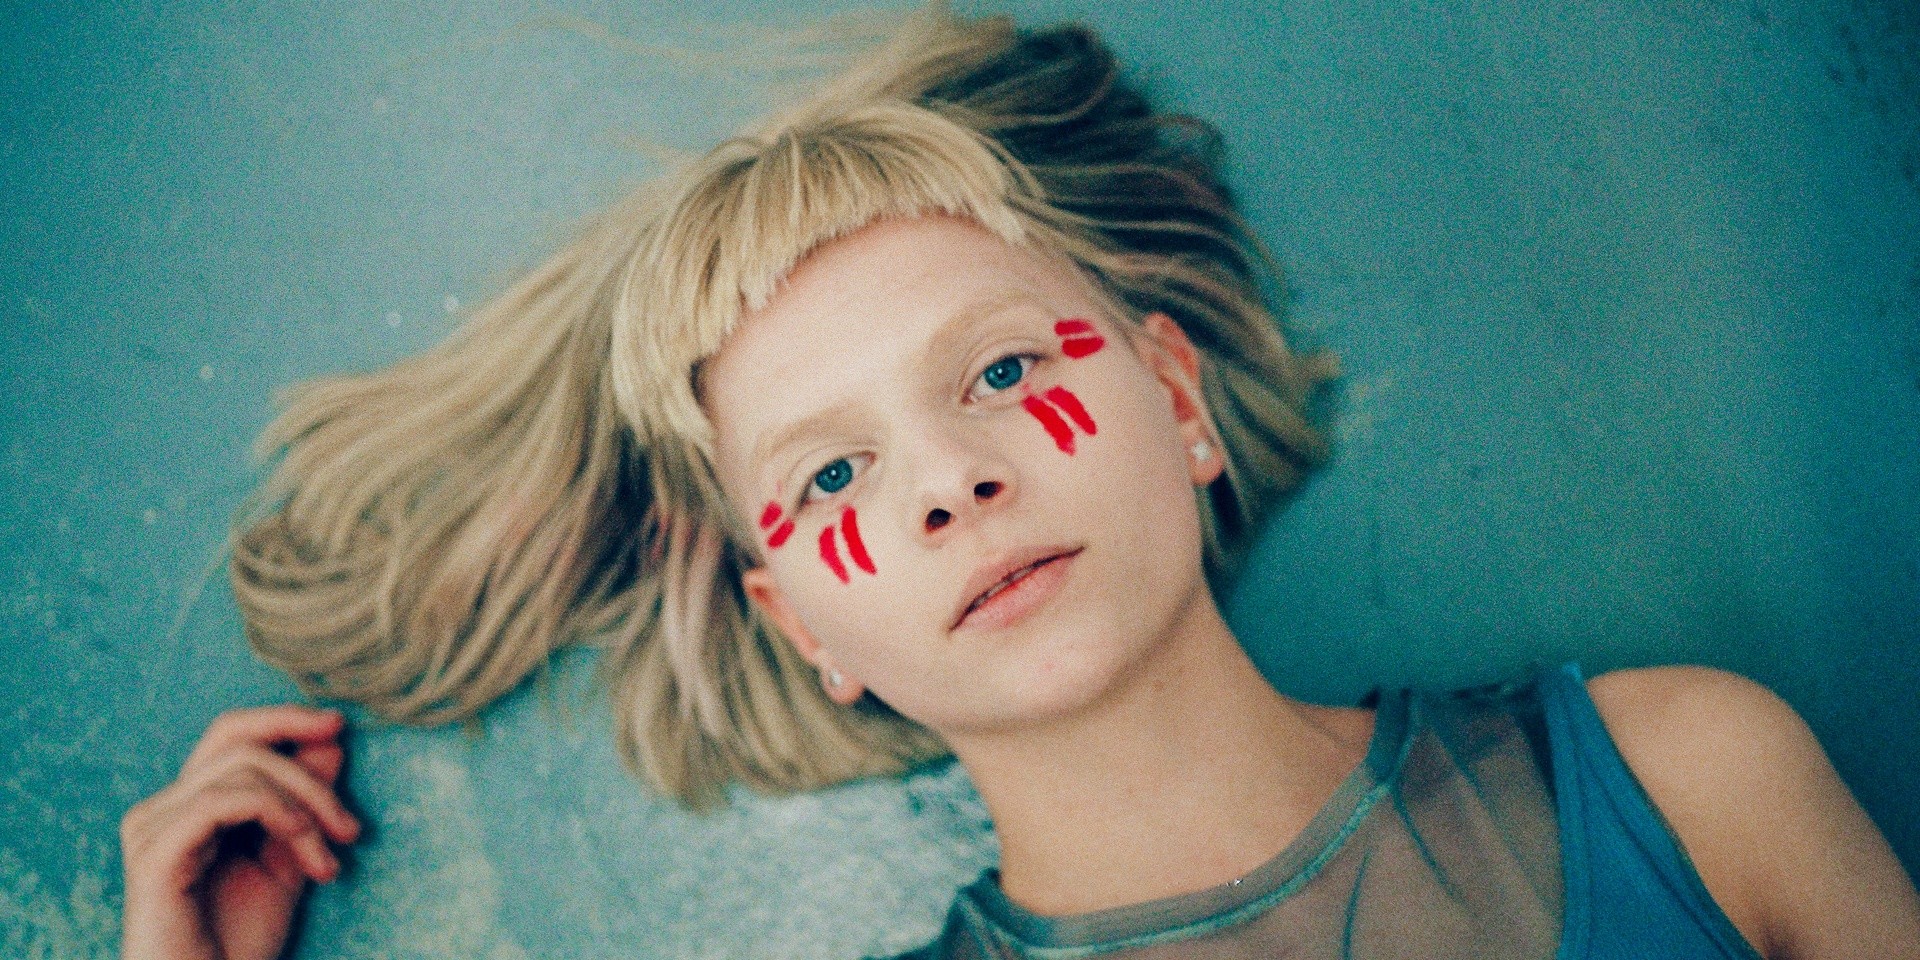 "It's about believing in all the tiny people who are actually very big": An interview with AURORA